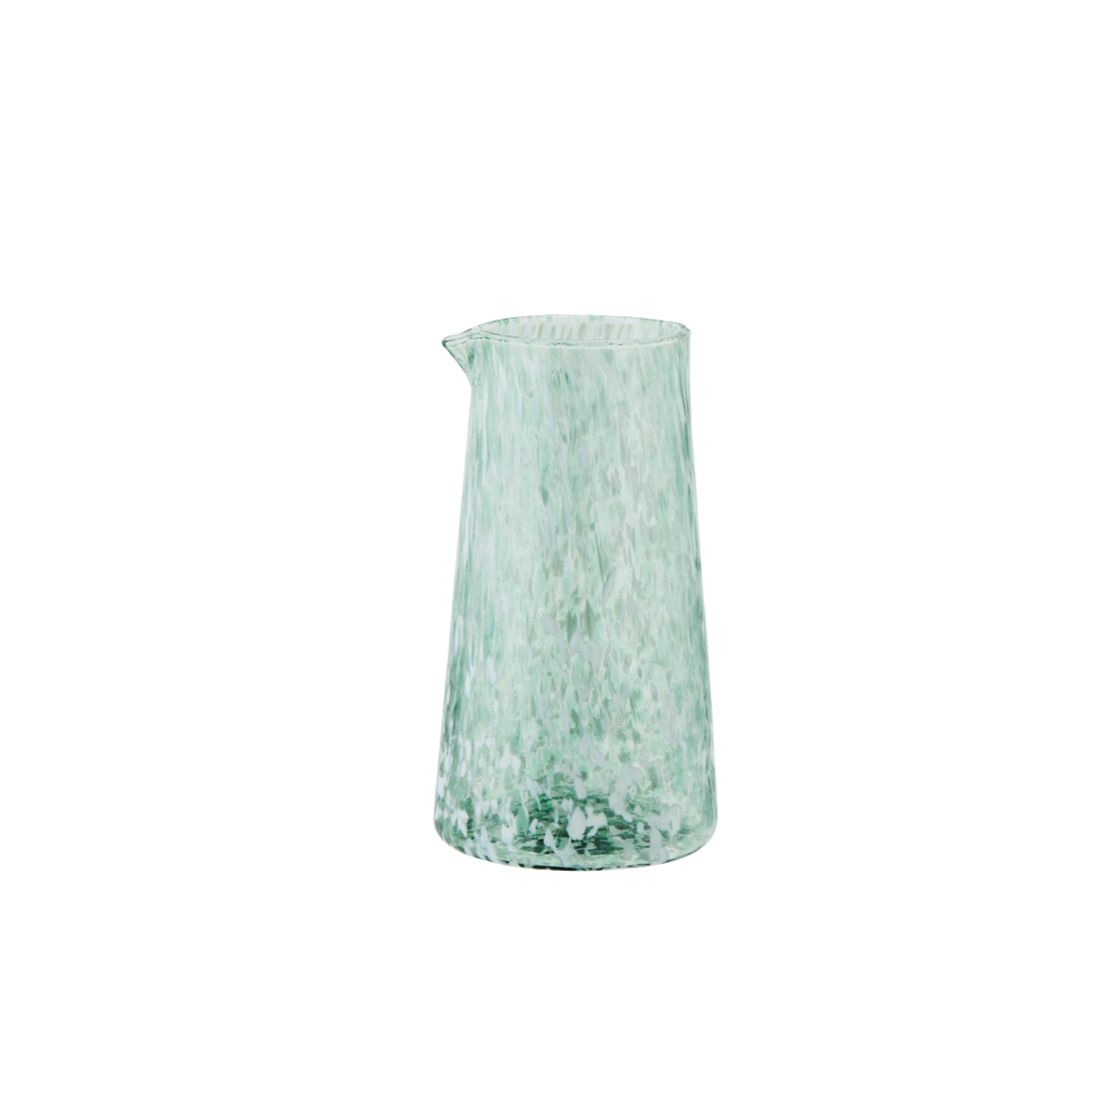 green handleless glass jug with white speckles